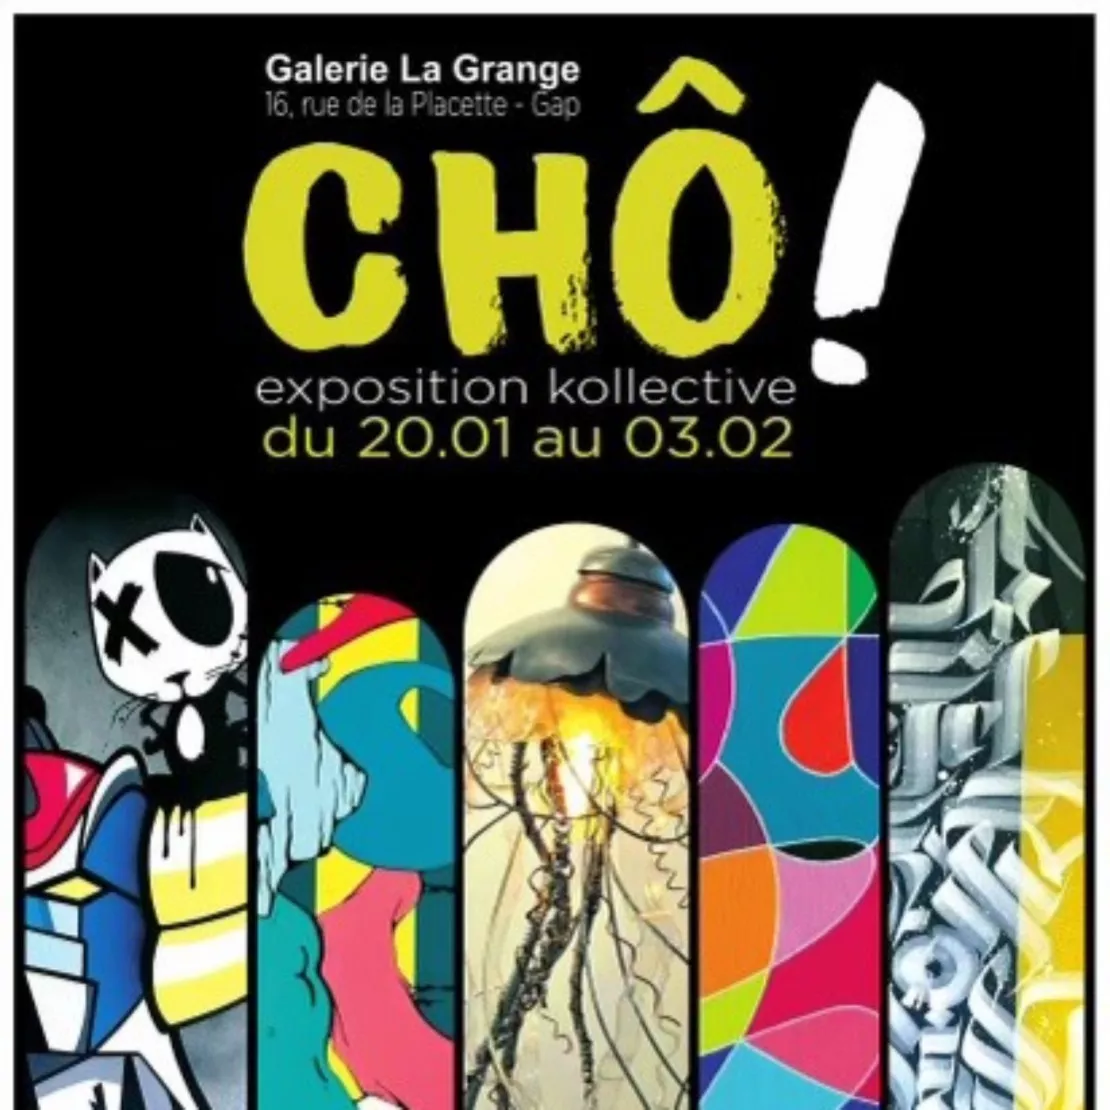 Alpes 1 & Vous : Expo Kollective Cho !